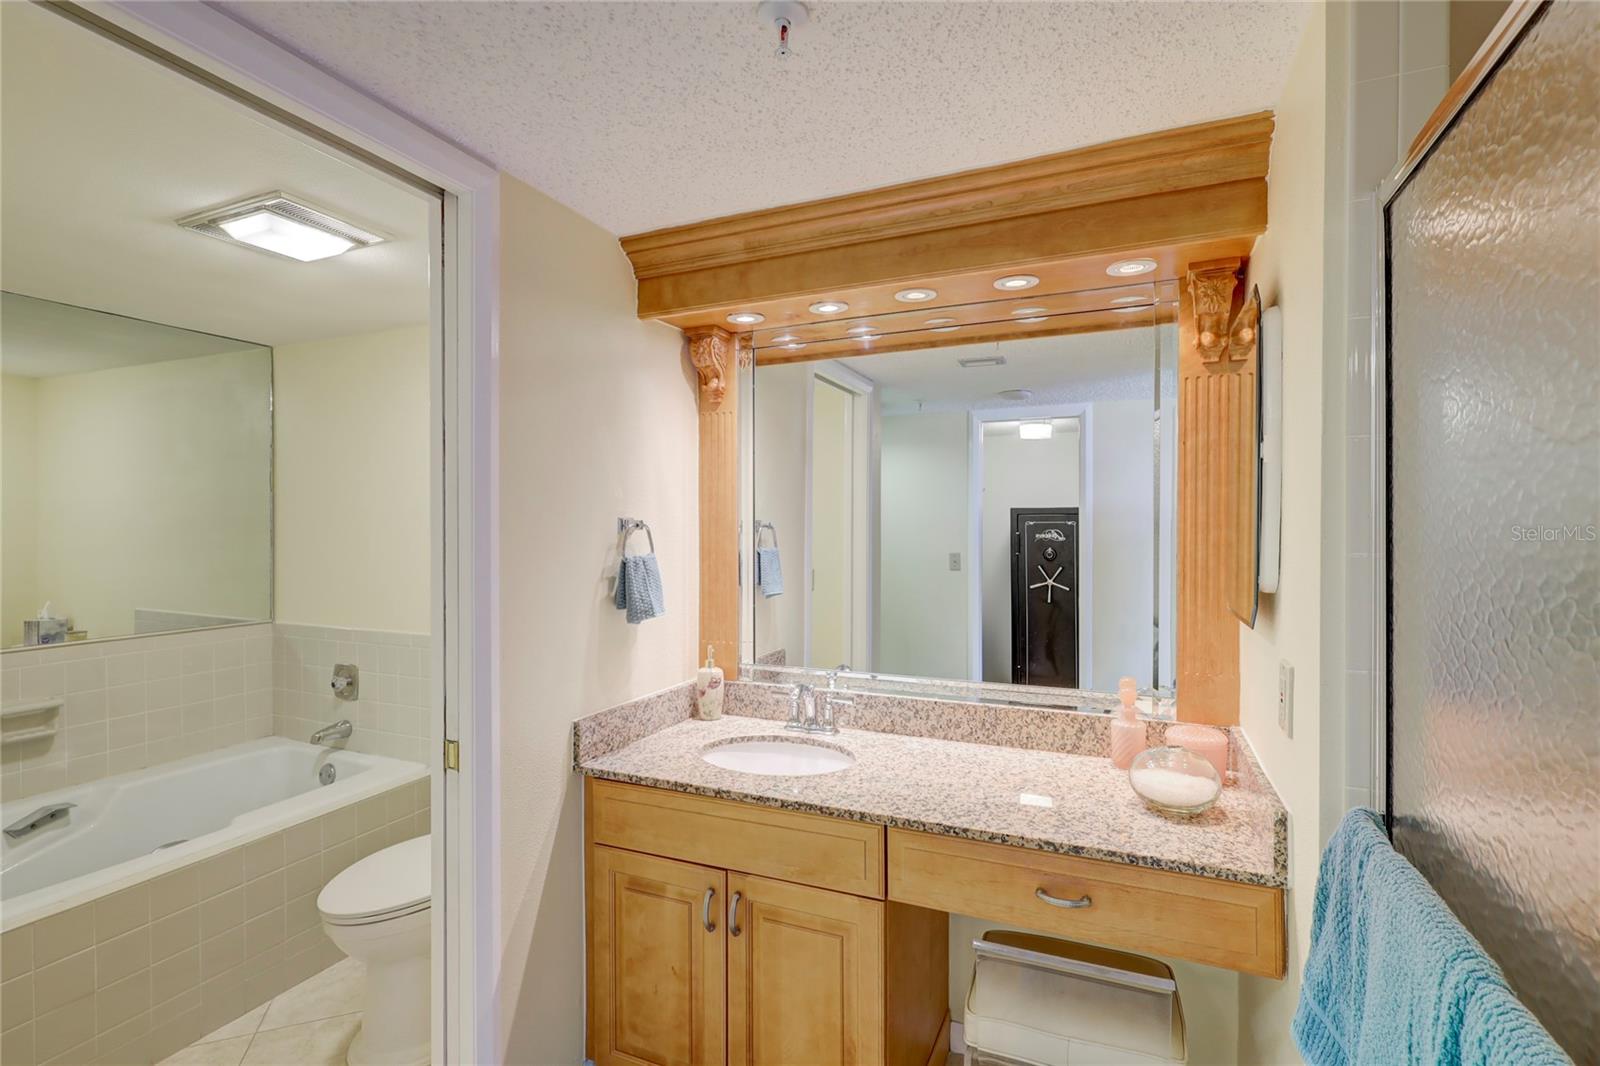 Master private tub & remodeled  designer vaniety wood cabinetry + granite counter.